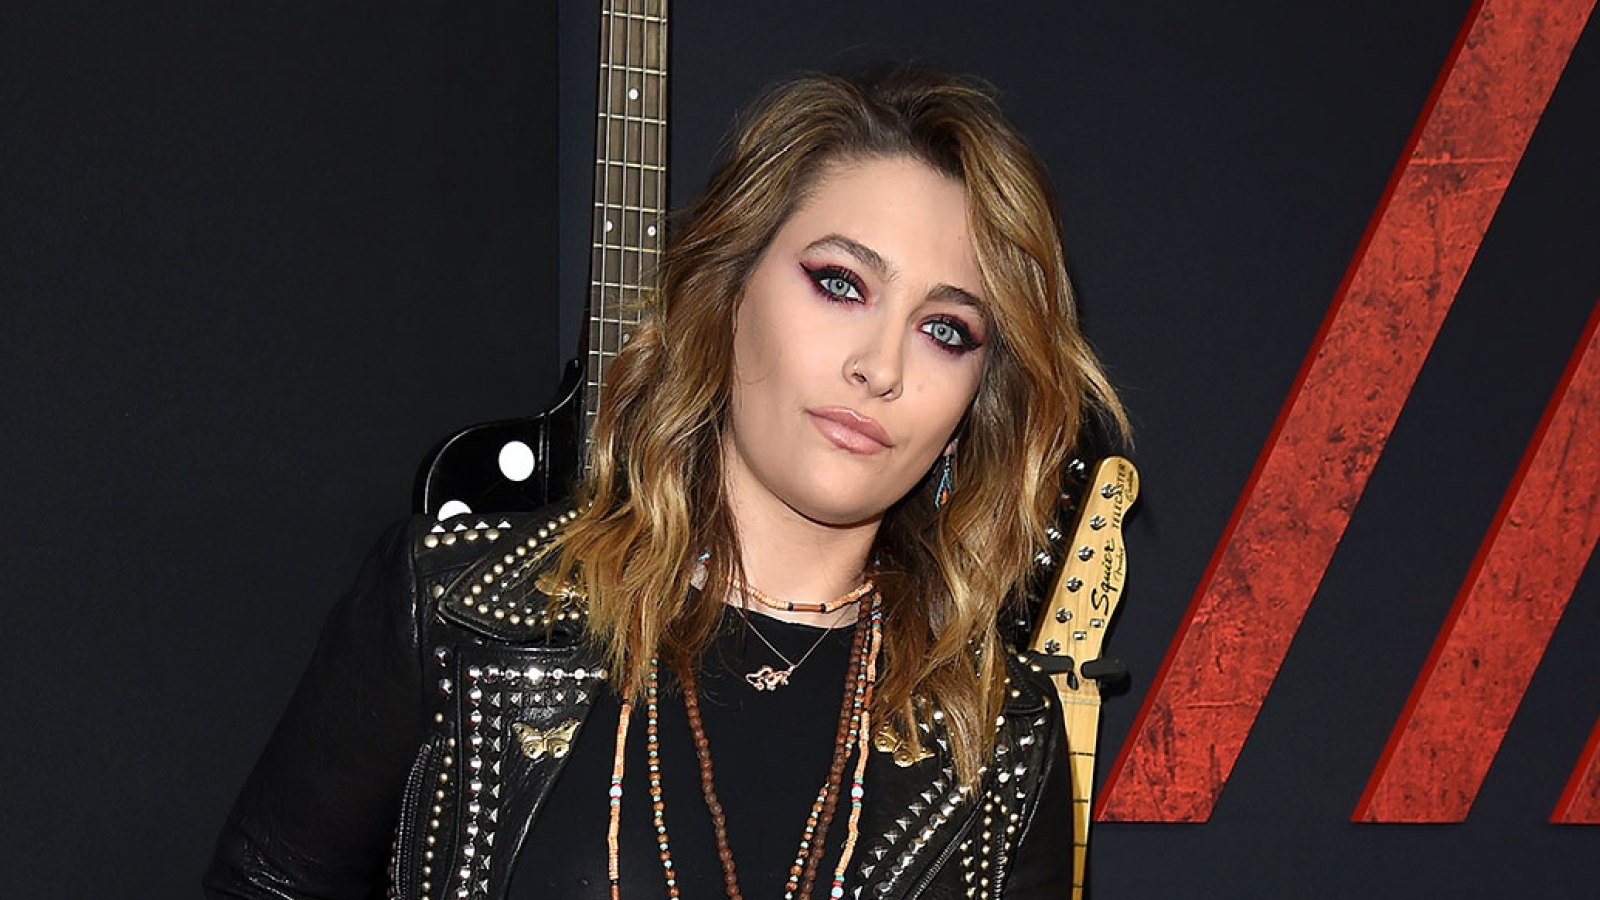 Paris Jackson Ordered to 'Stay Still' in 911 Call Before Hospitalization